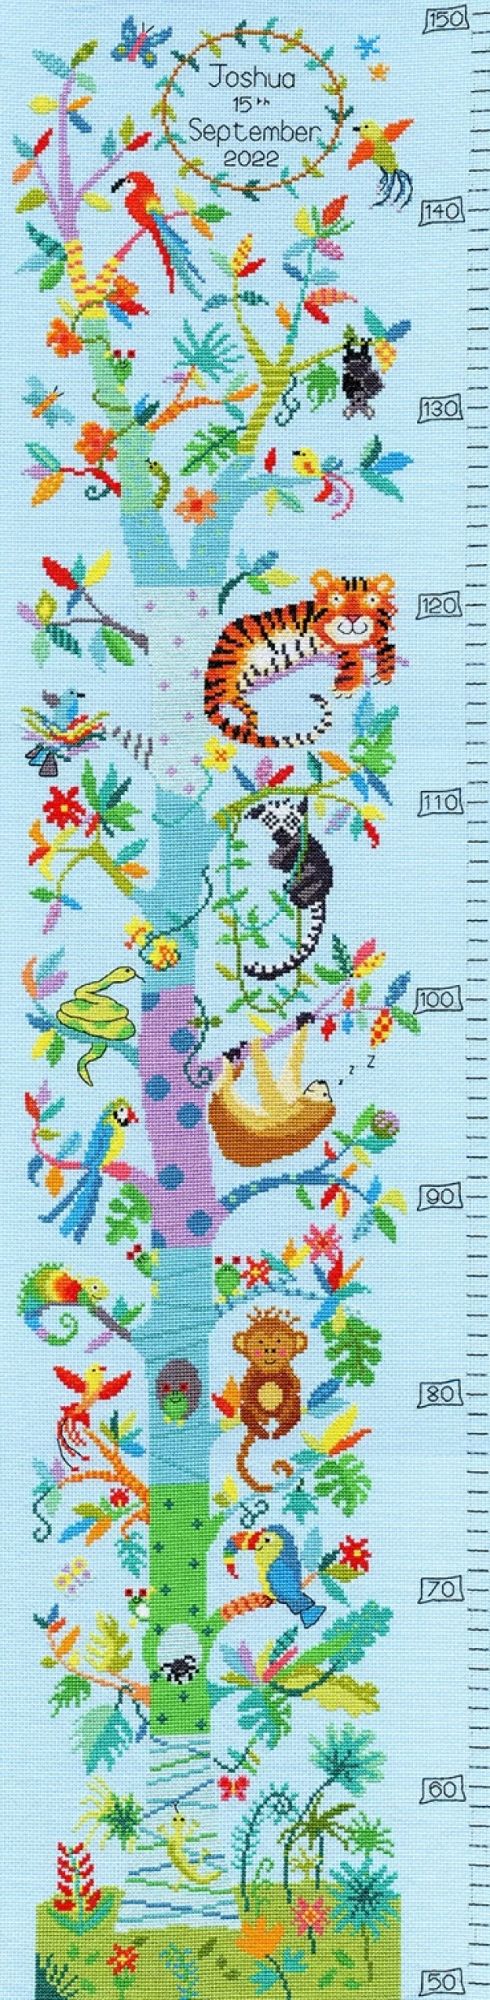 Tropical Height Chart - Bothy Threads Cross Stitch